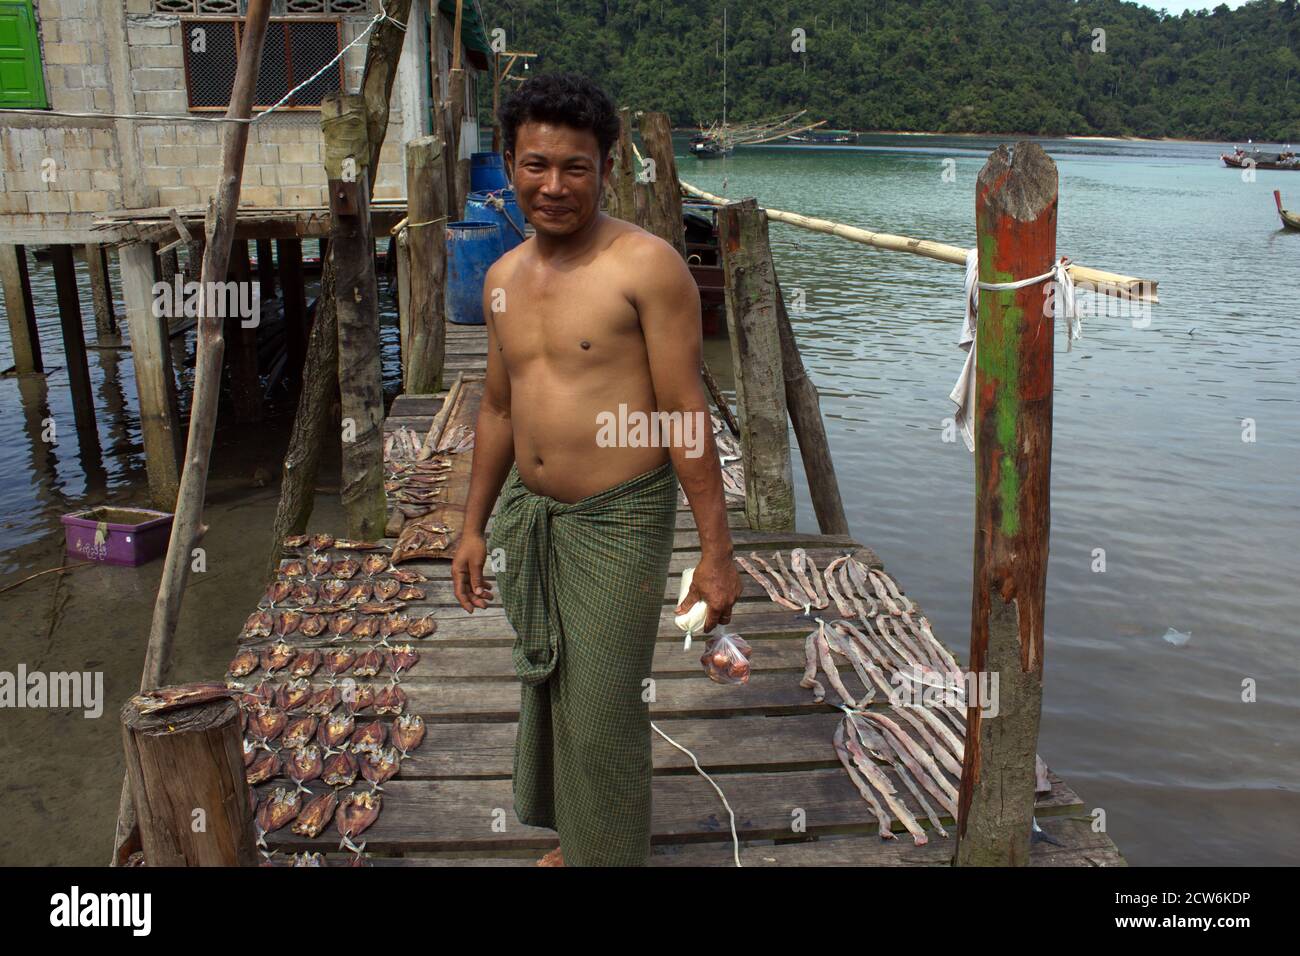 https://c8.alamy.com/comp/2CW6KDP/smiling-man-bare-chested-in-sarong-on-jetty-with-drying-fish-at-jalan-fishing-village-on-jalan-island-mergui-archipelago-myanmar-2CW6KDP.jpg